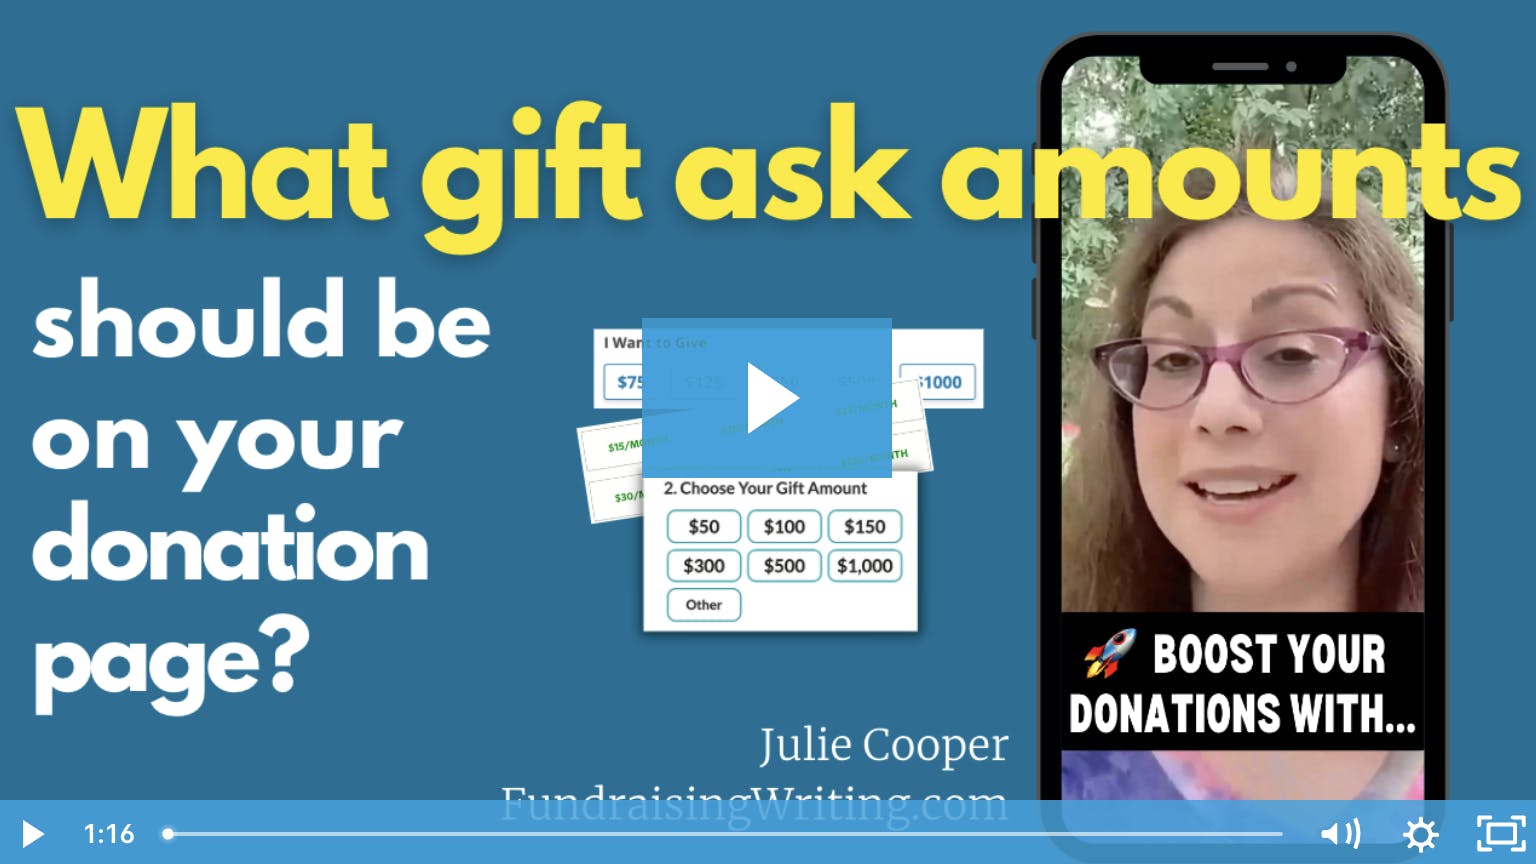 image of Julie Cooper with a video caption: "What gift ask amounts should be on your donation page?"